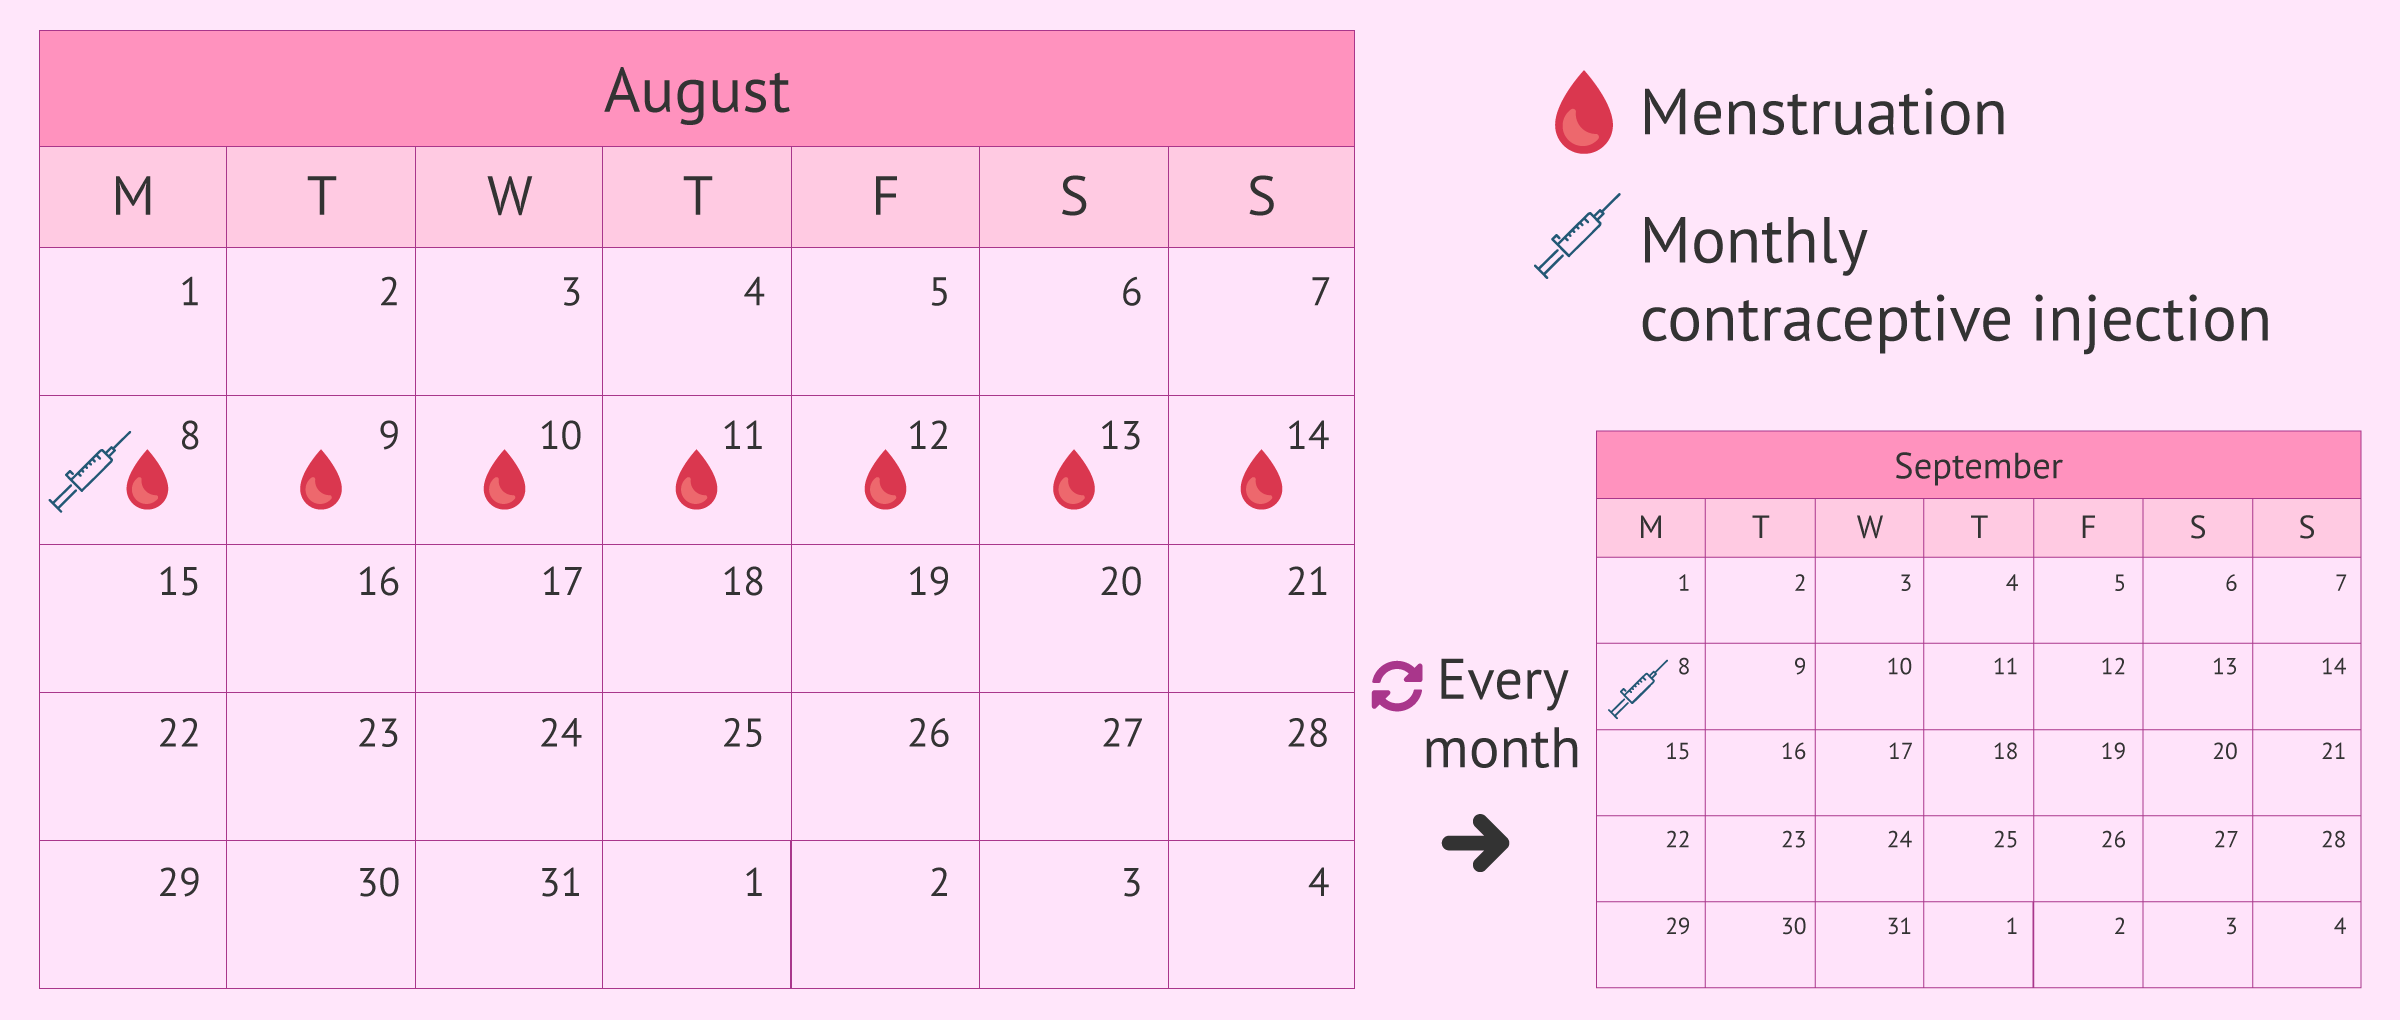 When to give the monthly contraceptive injection?